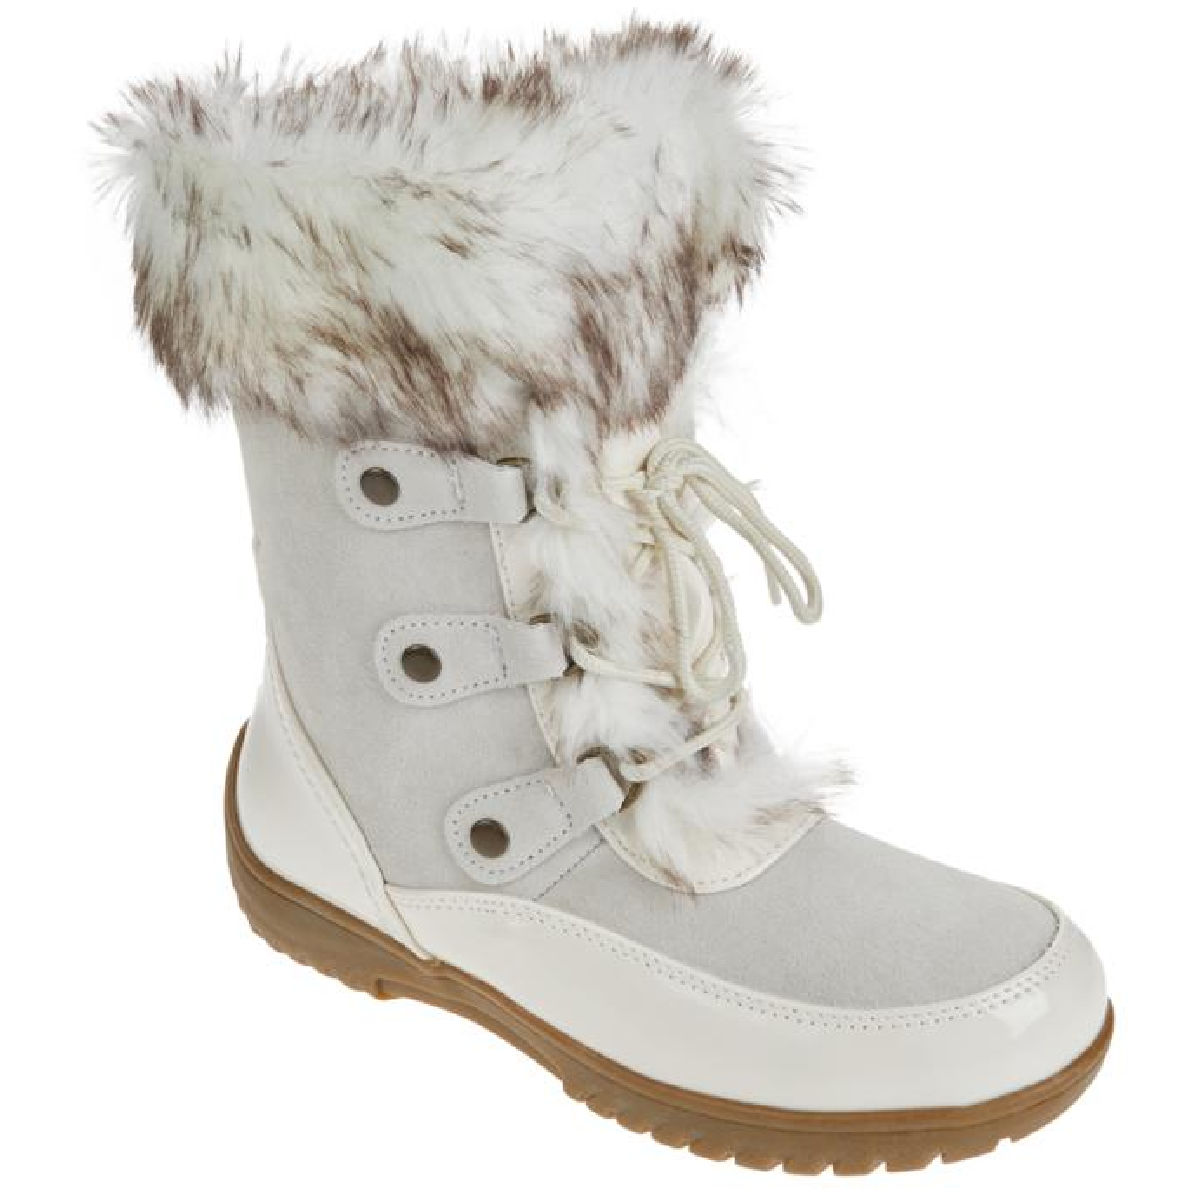 Sporto Minor Waterproof Suede Mid-Calf Boot with Faux Fur Trim